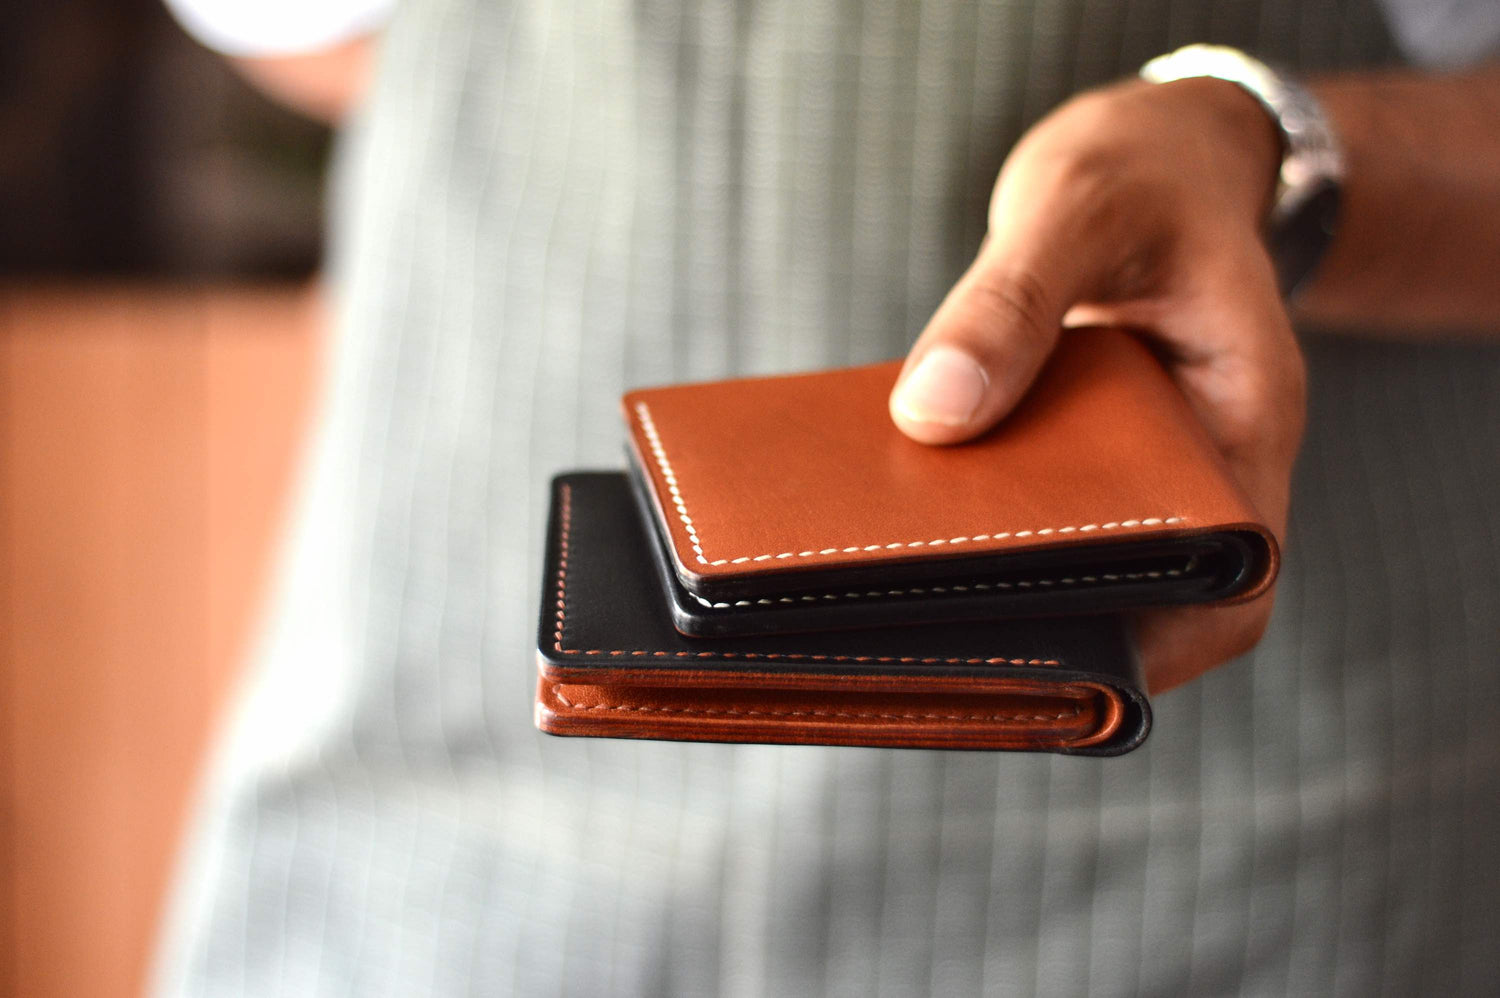 Quality Handcrafted Leather Goods, Full Grain Leather